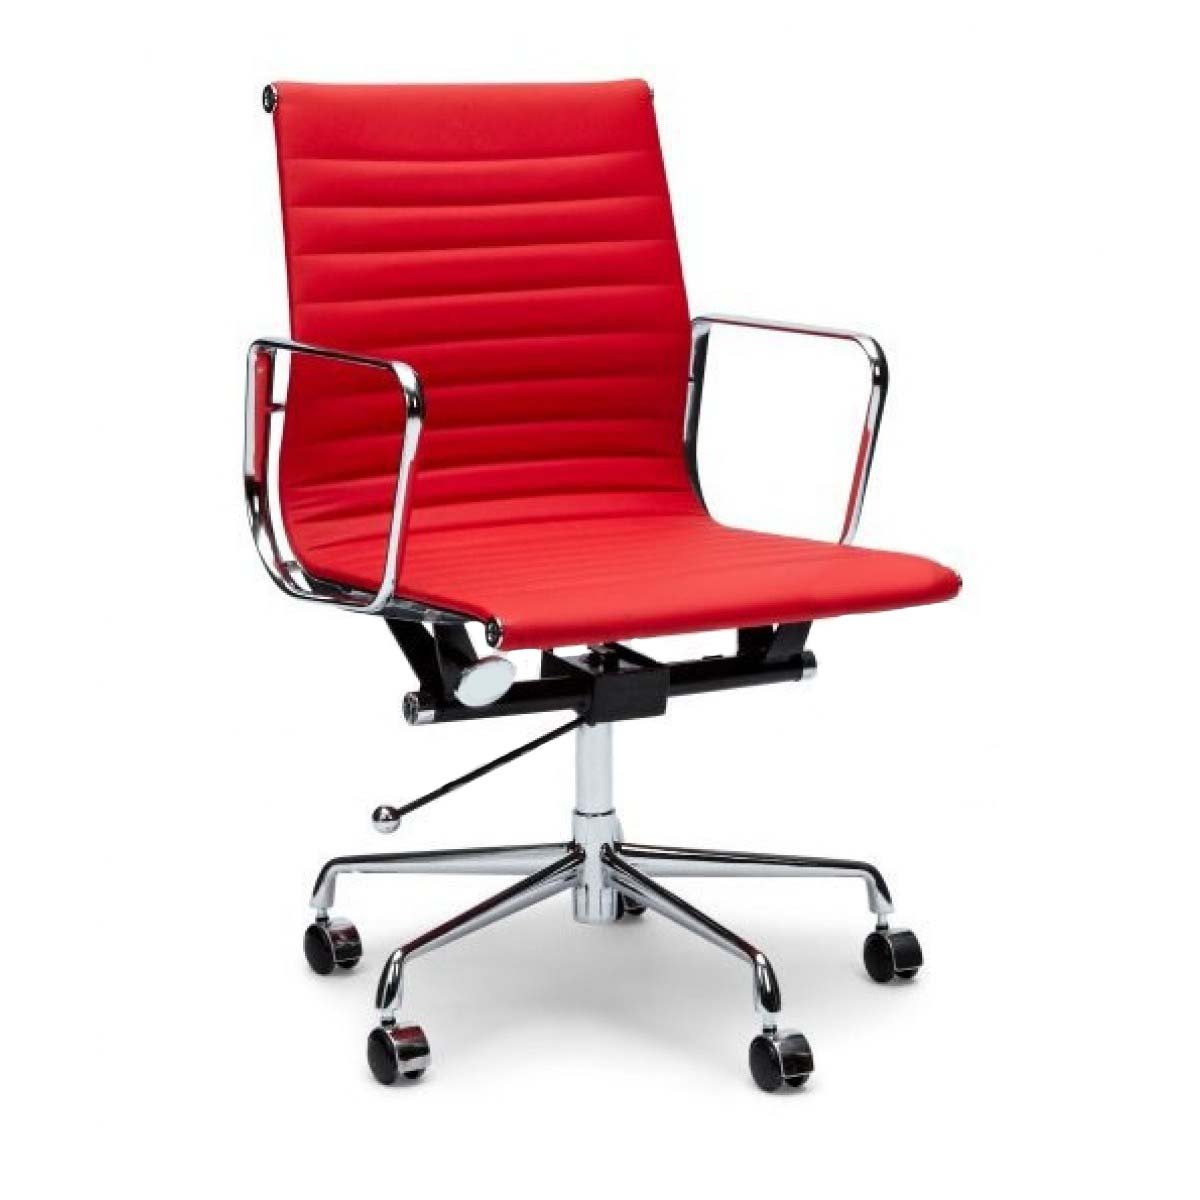 Ariana Leather Office Chair - Red